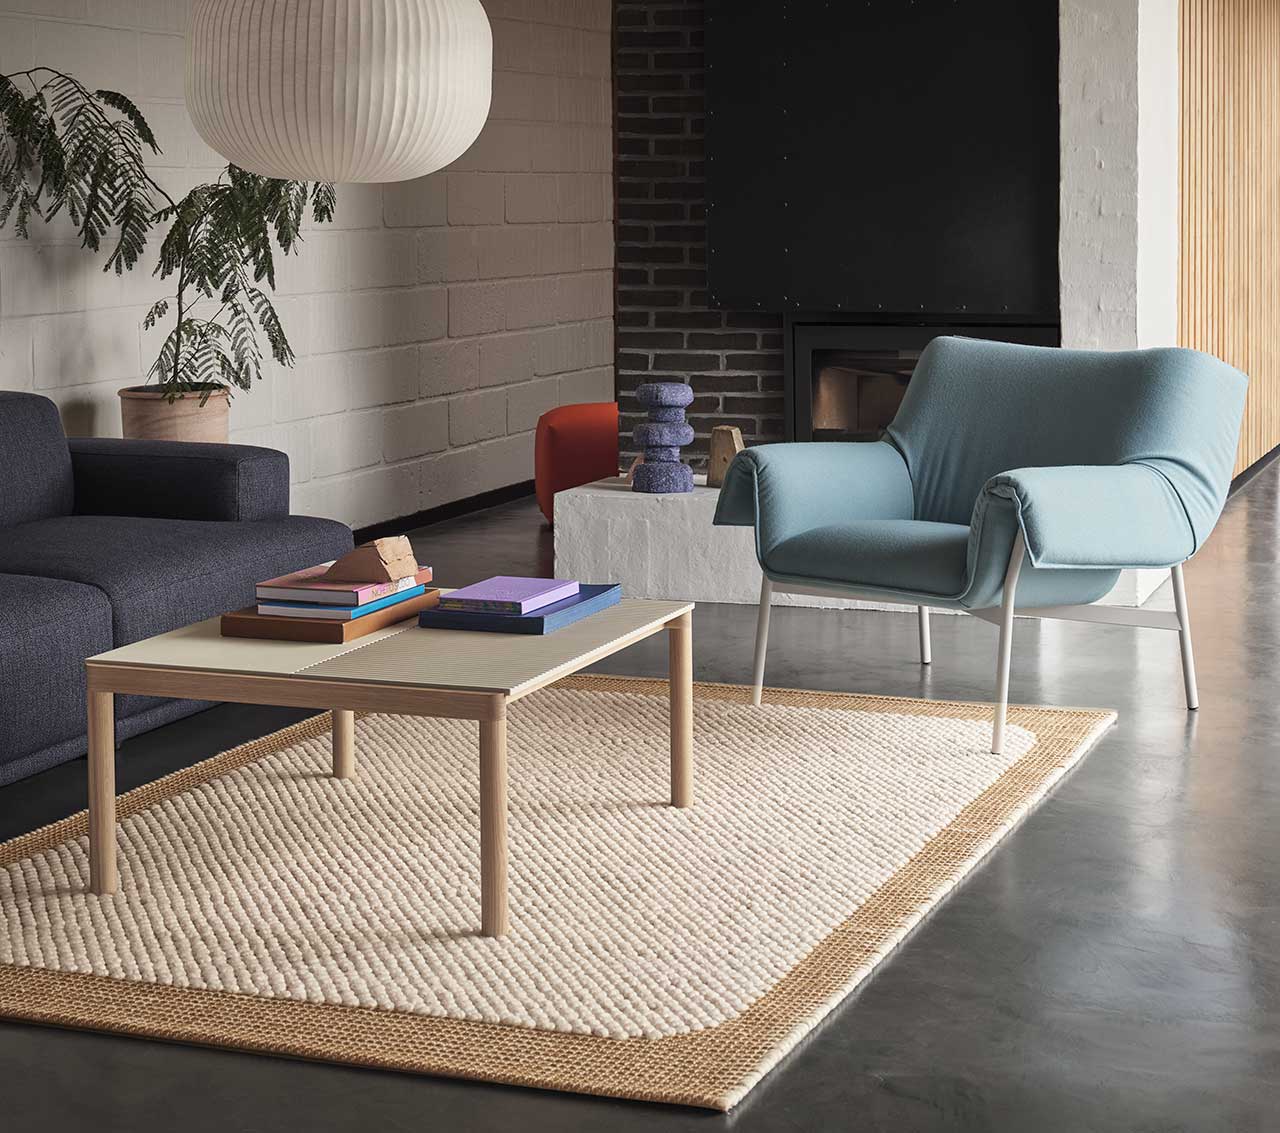 Muuto Collaborates With 3 Designers for Spring 2023